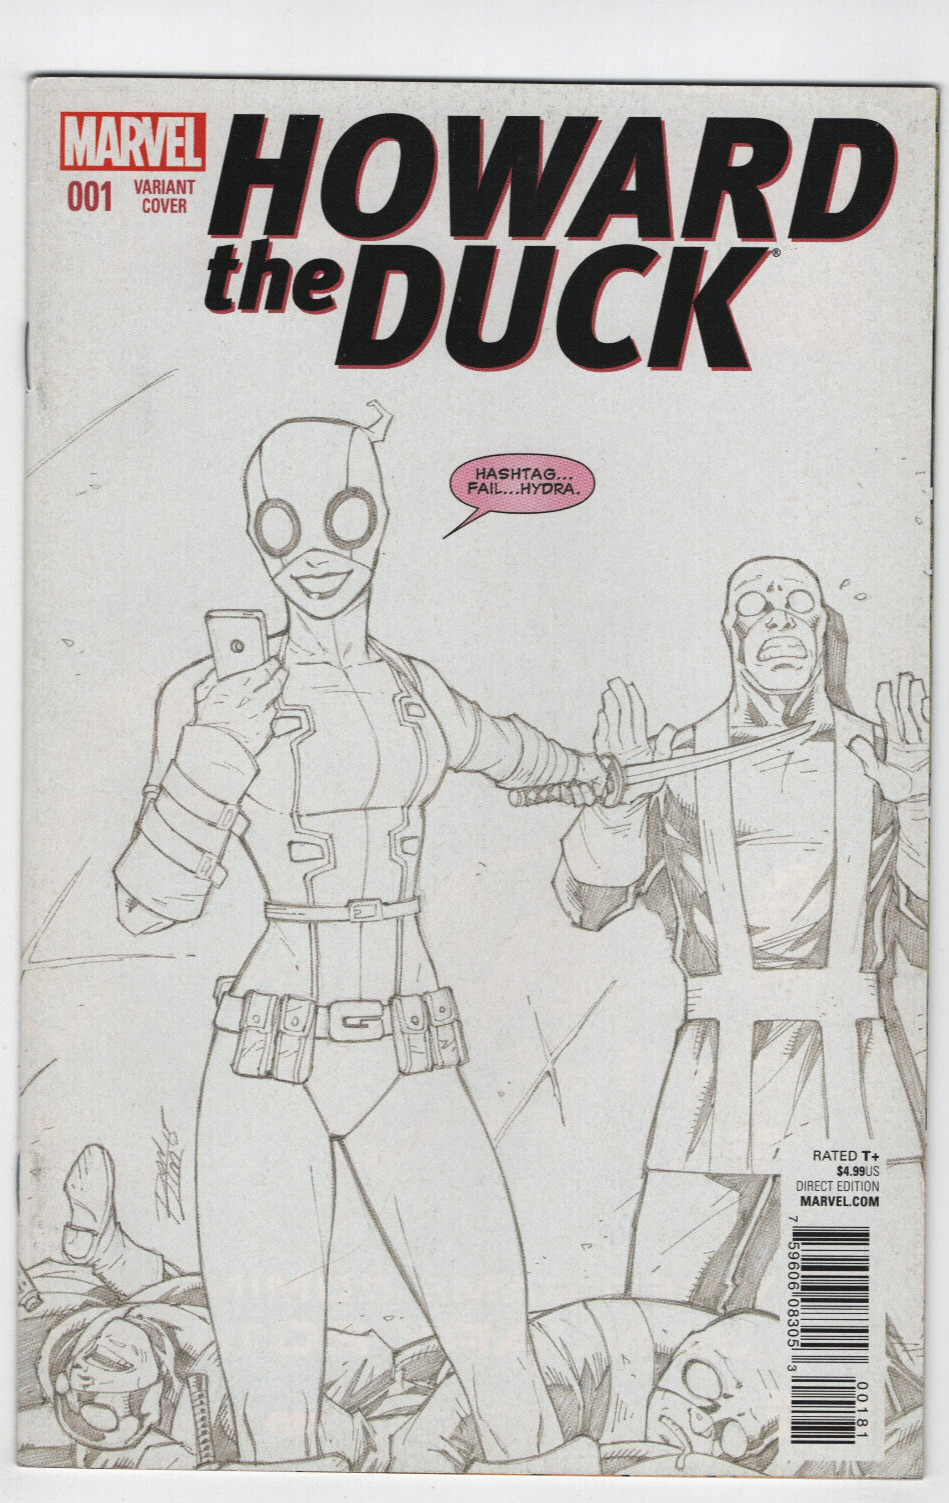 HOWARD THE DUCK #1 2ND PRINT LIM SKETCH VARIANT 1ST APPEARANCE APP GWENPOOL 